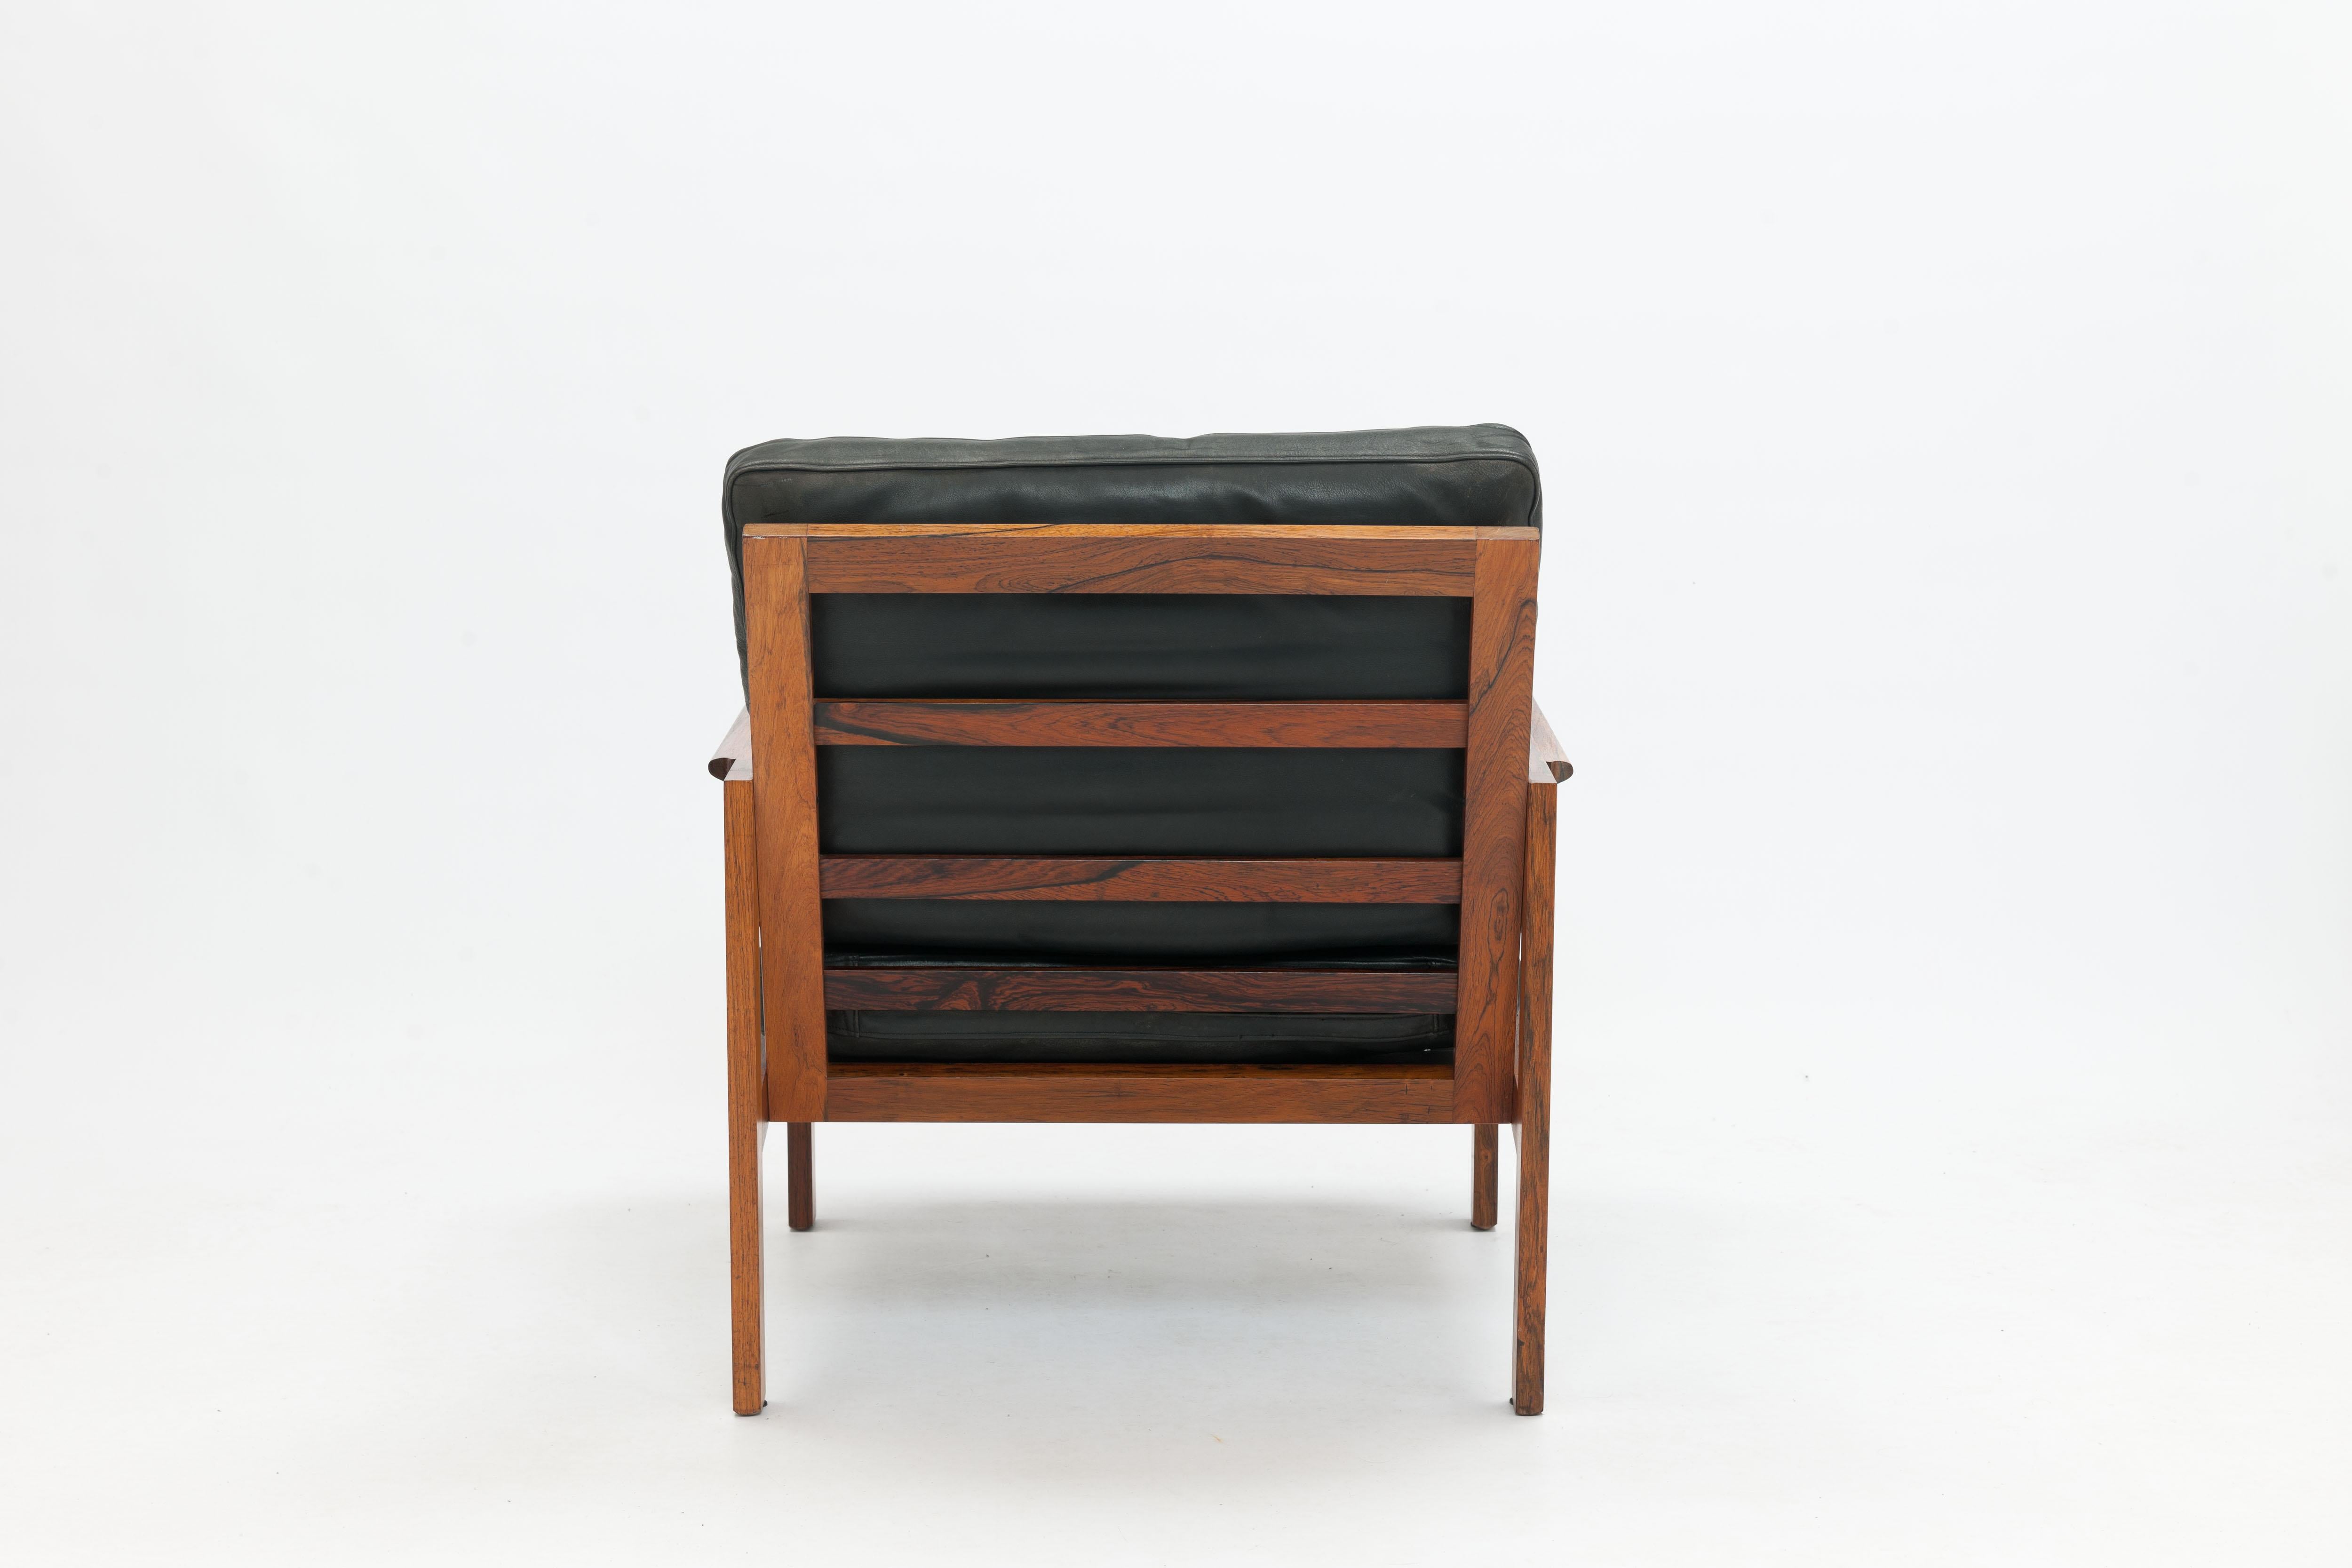 Rosewood & Black Leather Capella Arm Chair by Illum Wikkelsø, Pair Available 1